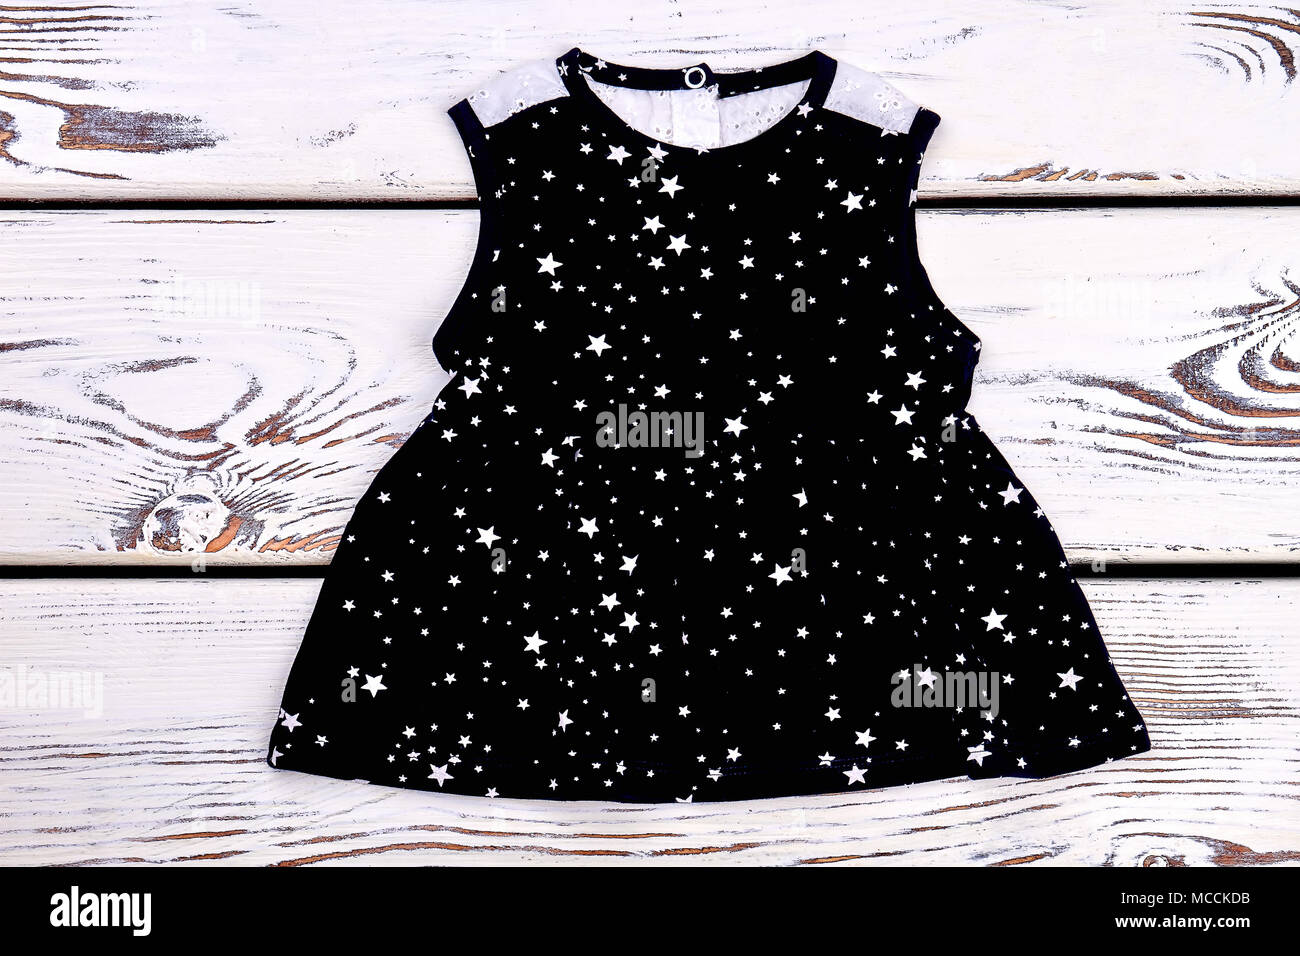 black top for baby girl